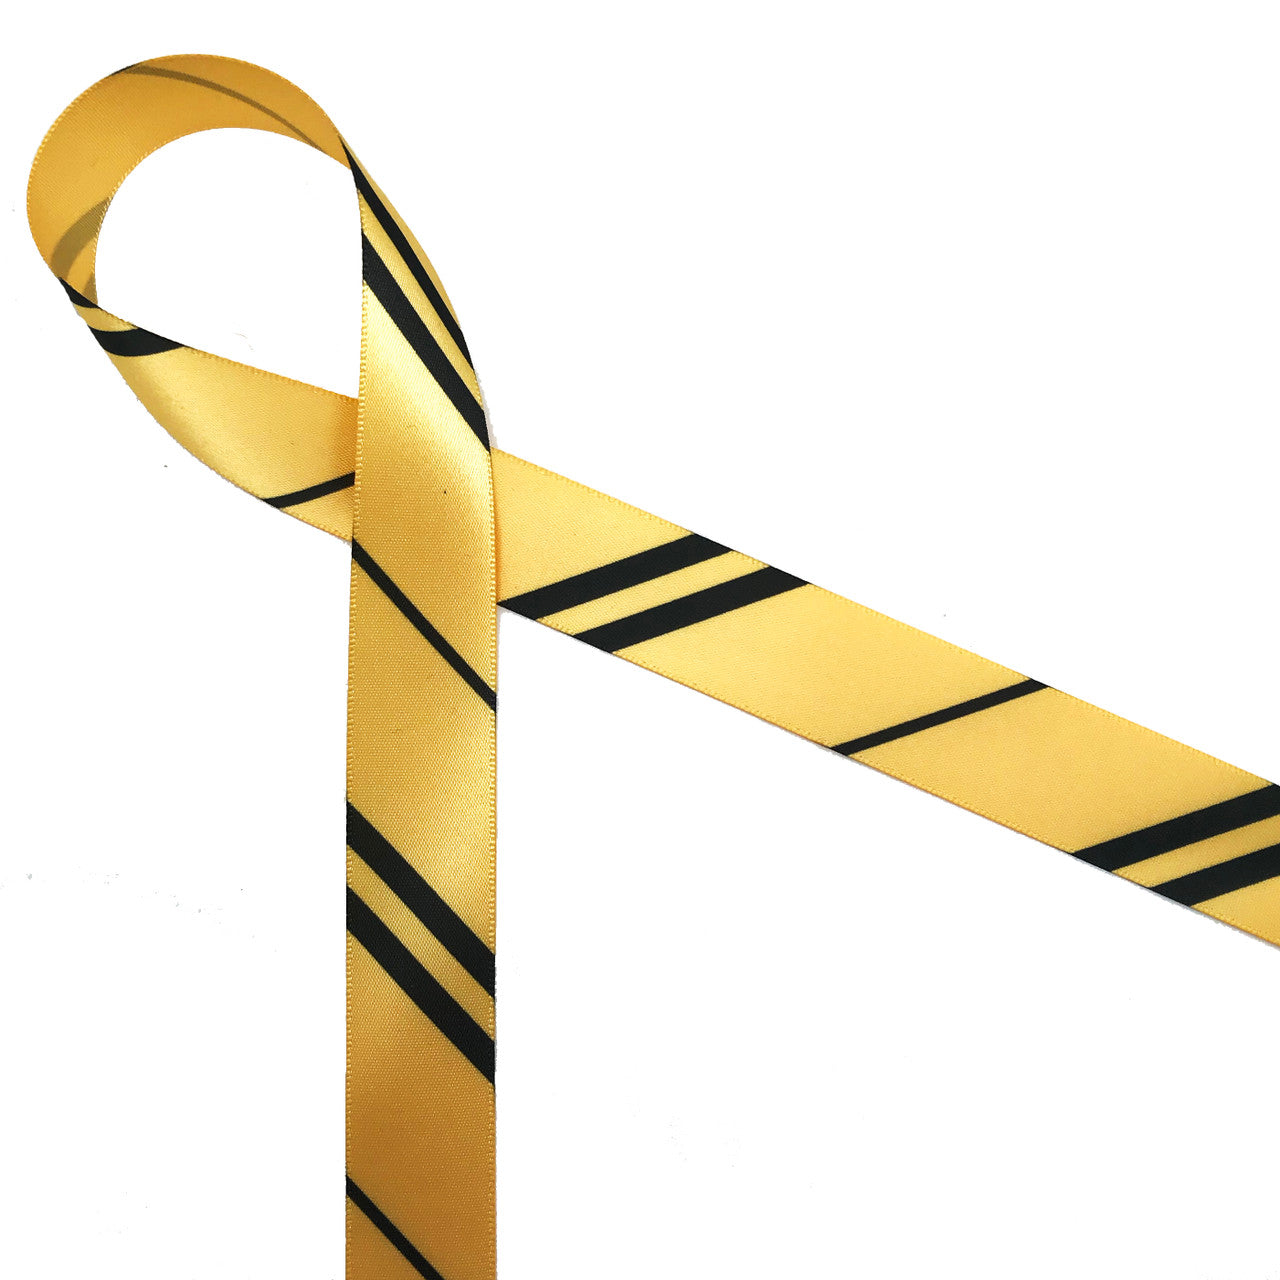 Wizard ribbon, Stripes of yellow and black for  Lanyards, crafts, costume printed on 7/8" yellow gold satin